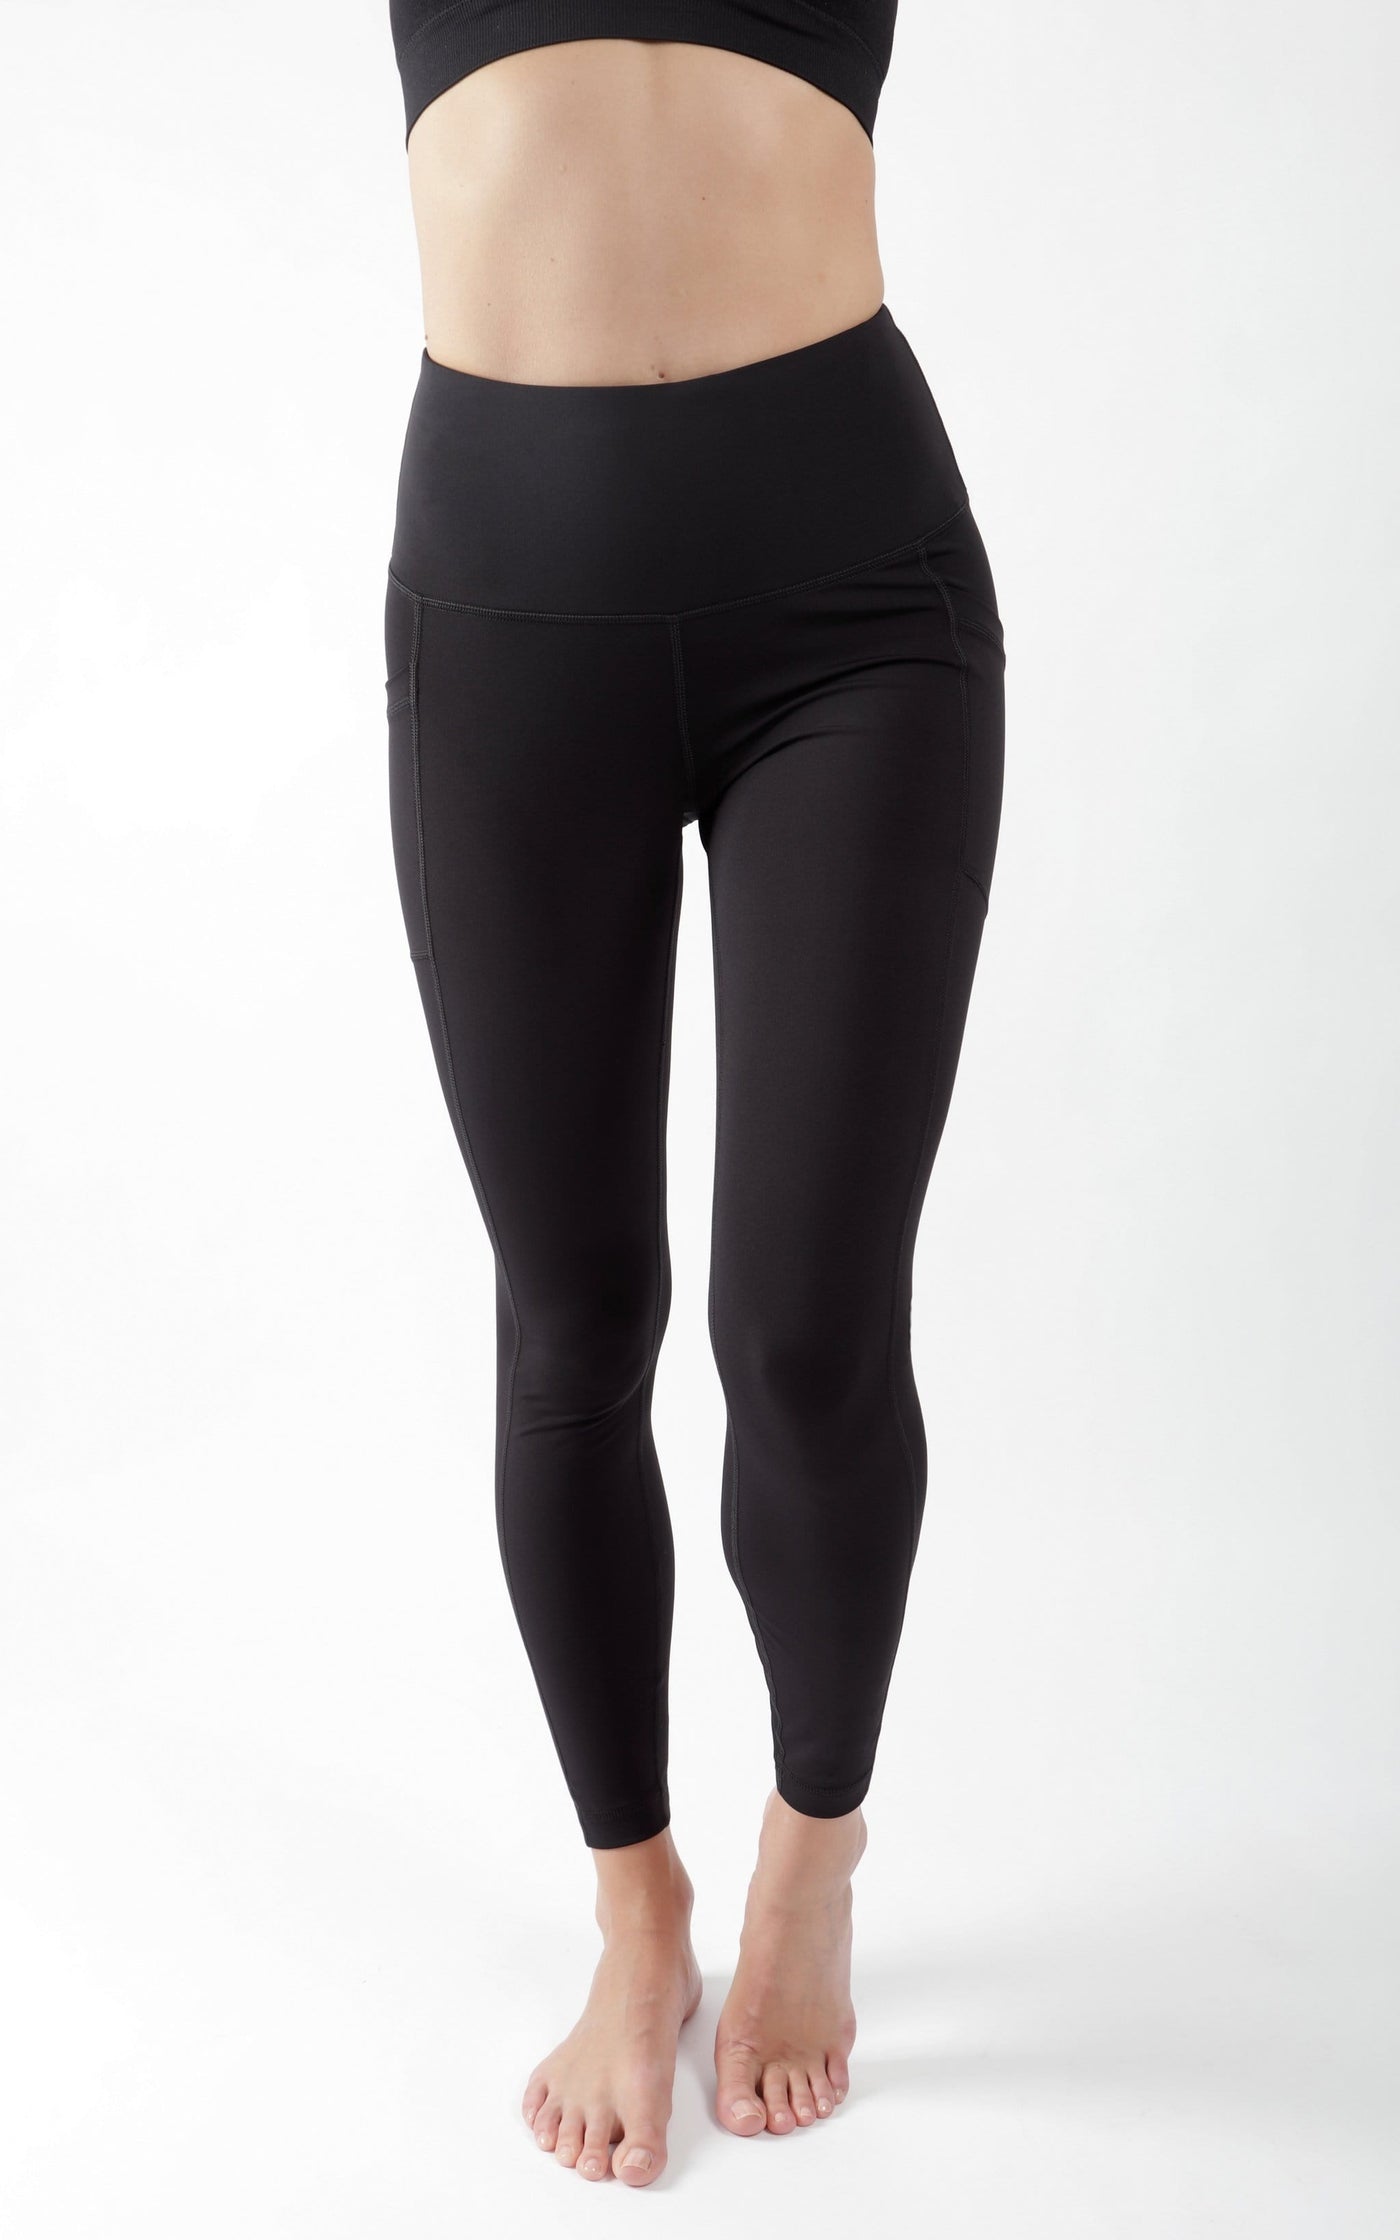 Squat Proof Interlink High Waist 7/8 Ankle Side Leggin With, 59% OFF